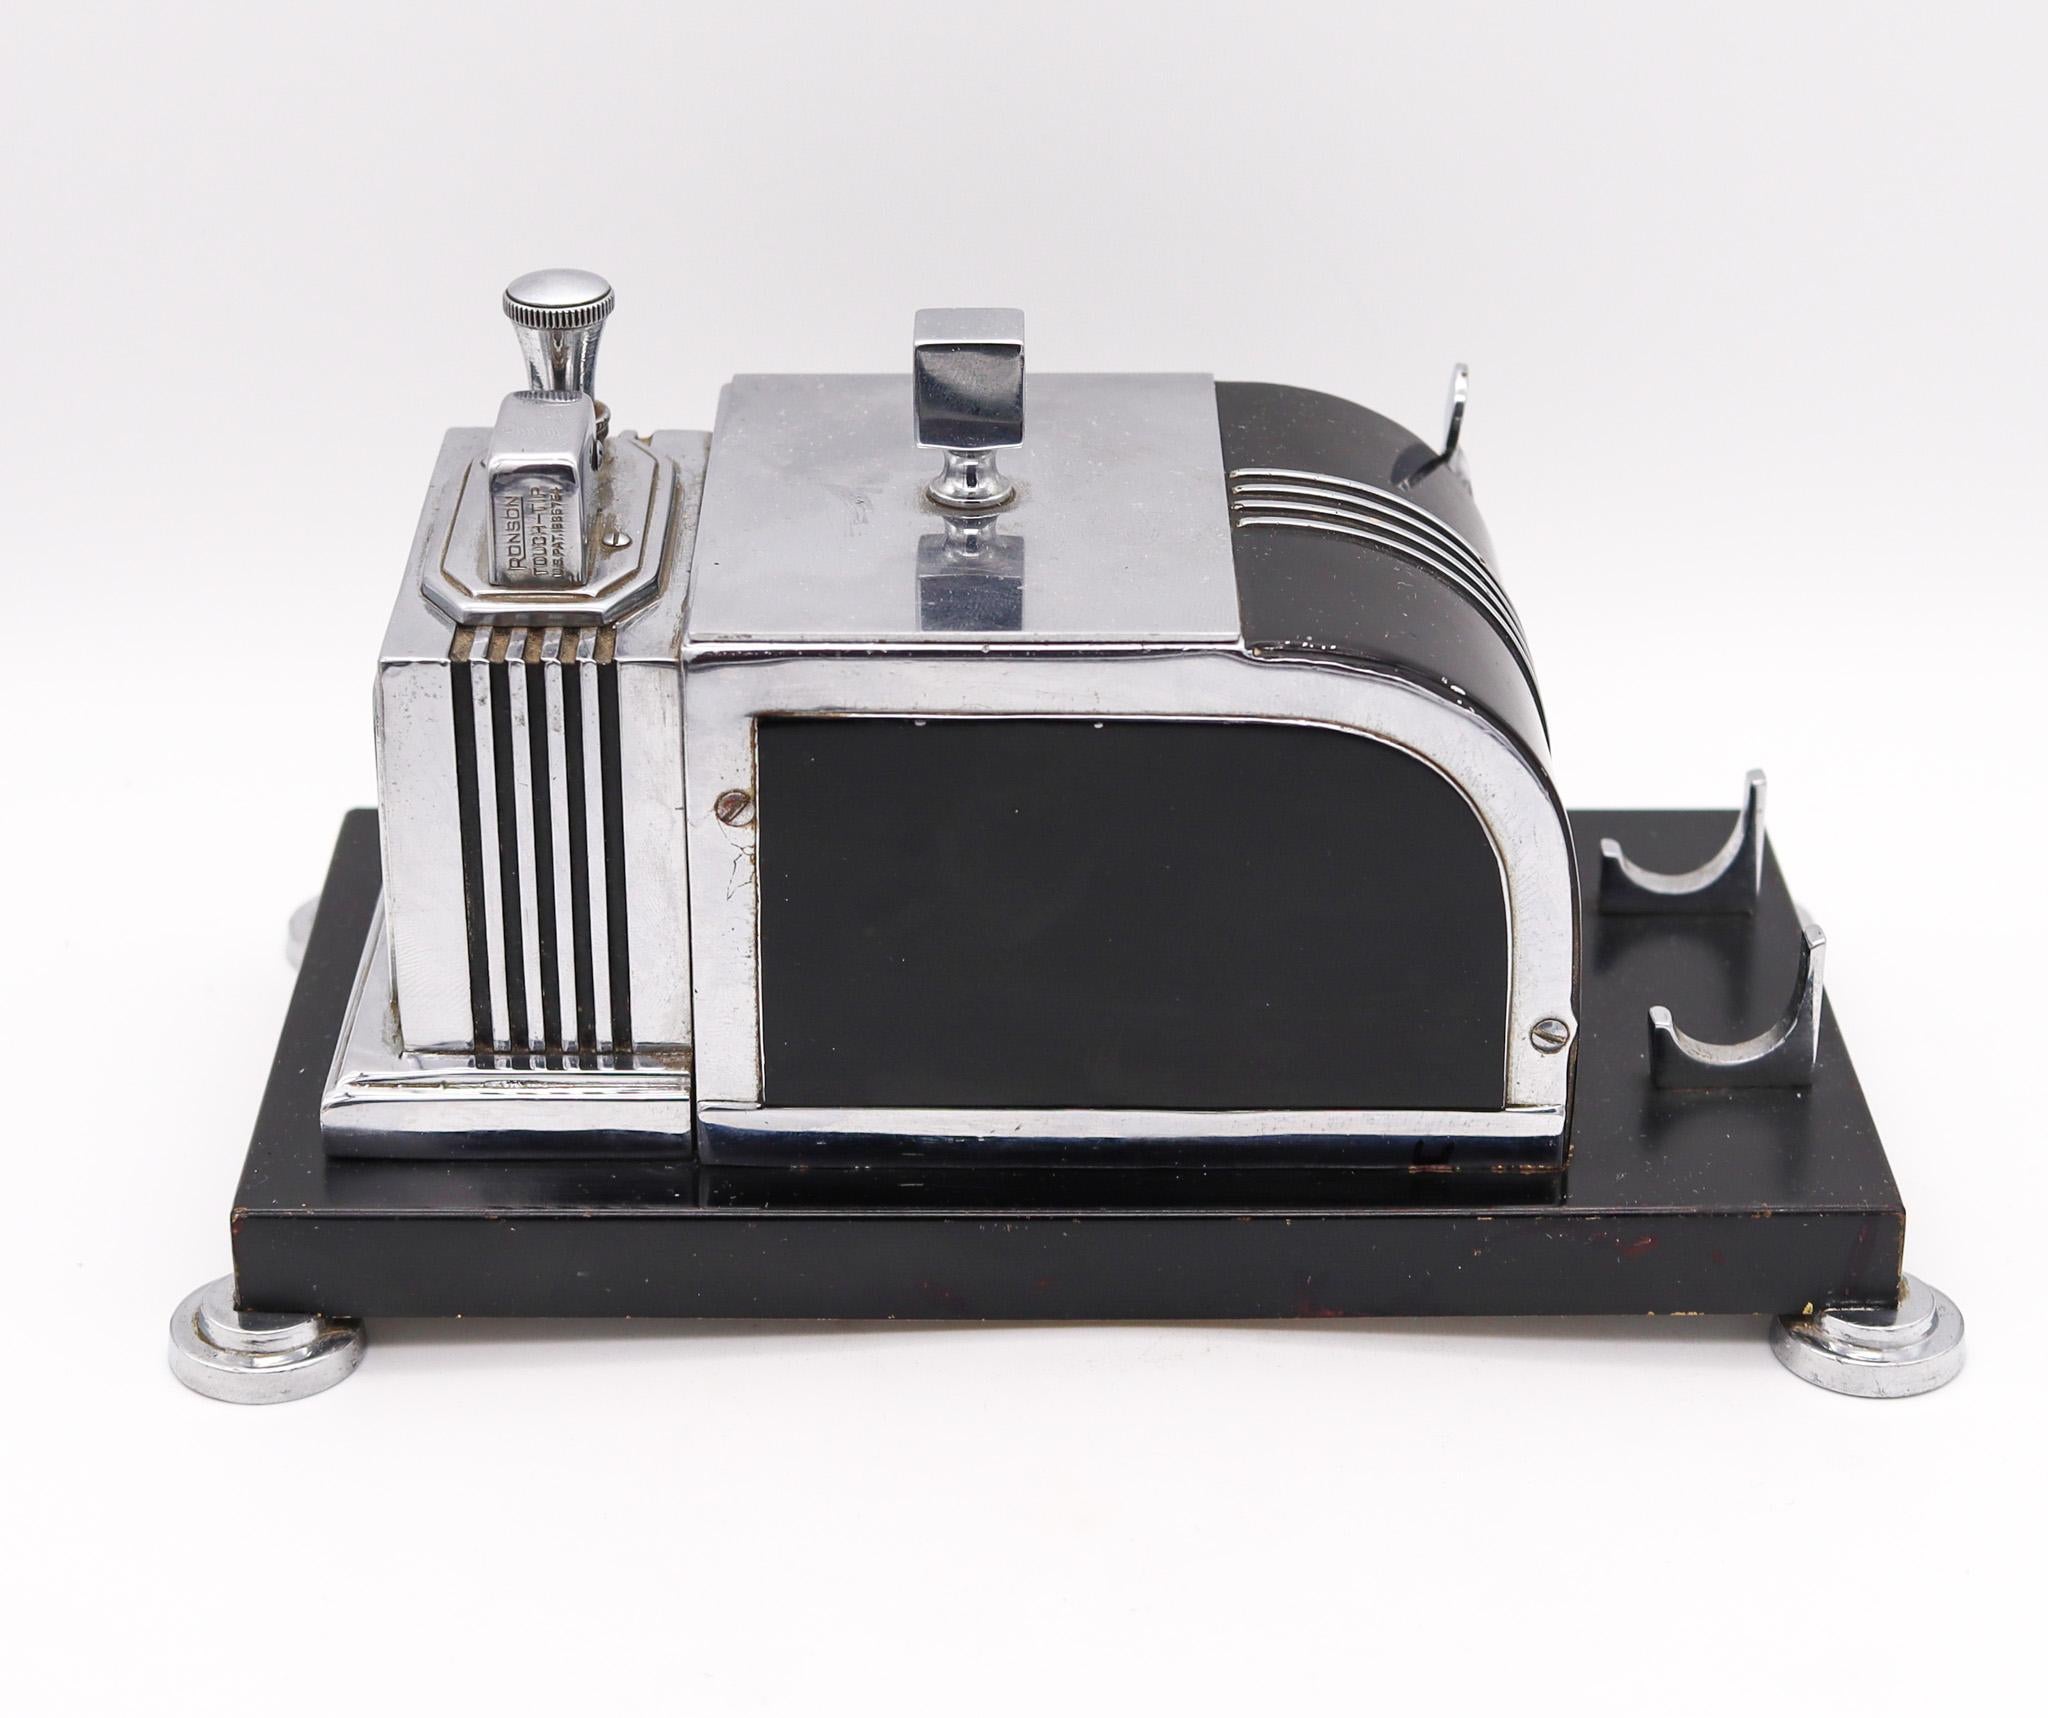 Art deco mechanical dispenser box with lighter made by Ronson.

An exceptional and very decorative mechanical desk box, created in the city of Newark, New Jersey United States by The Ronson Metal Works Co. during the art deco period, back in the